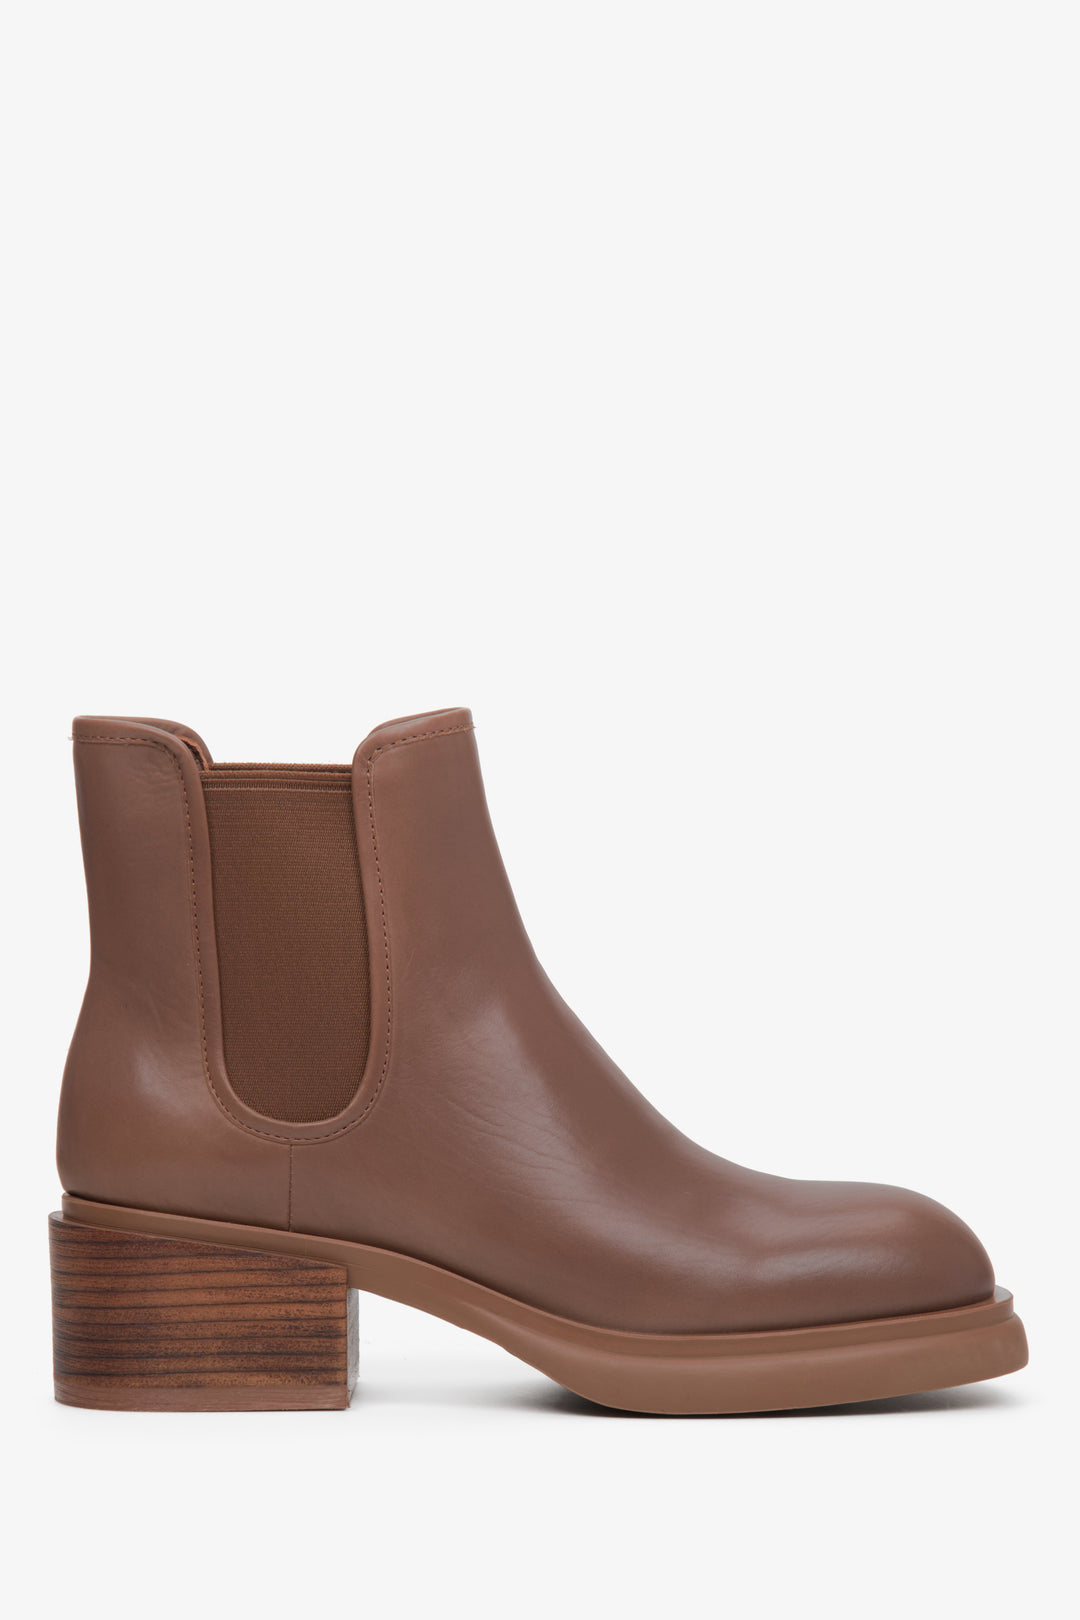 Comfy and elegant women's ankle boots.